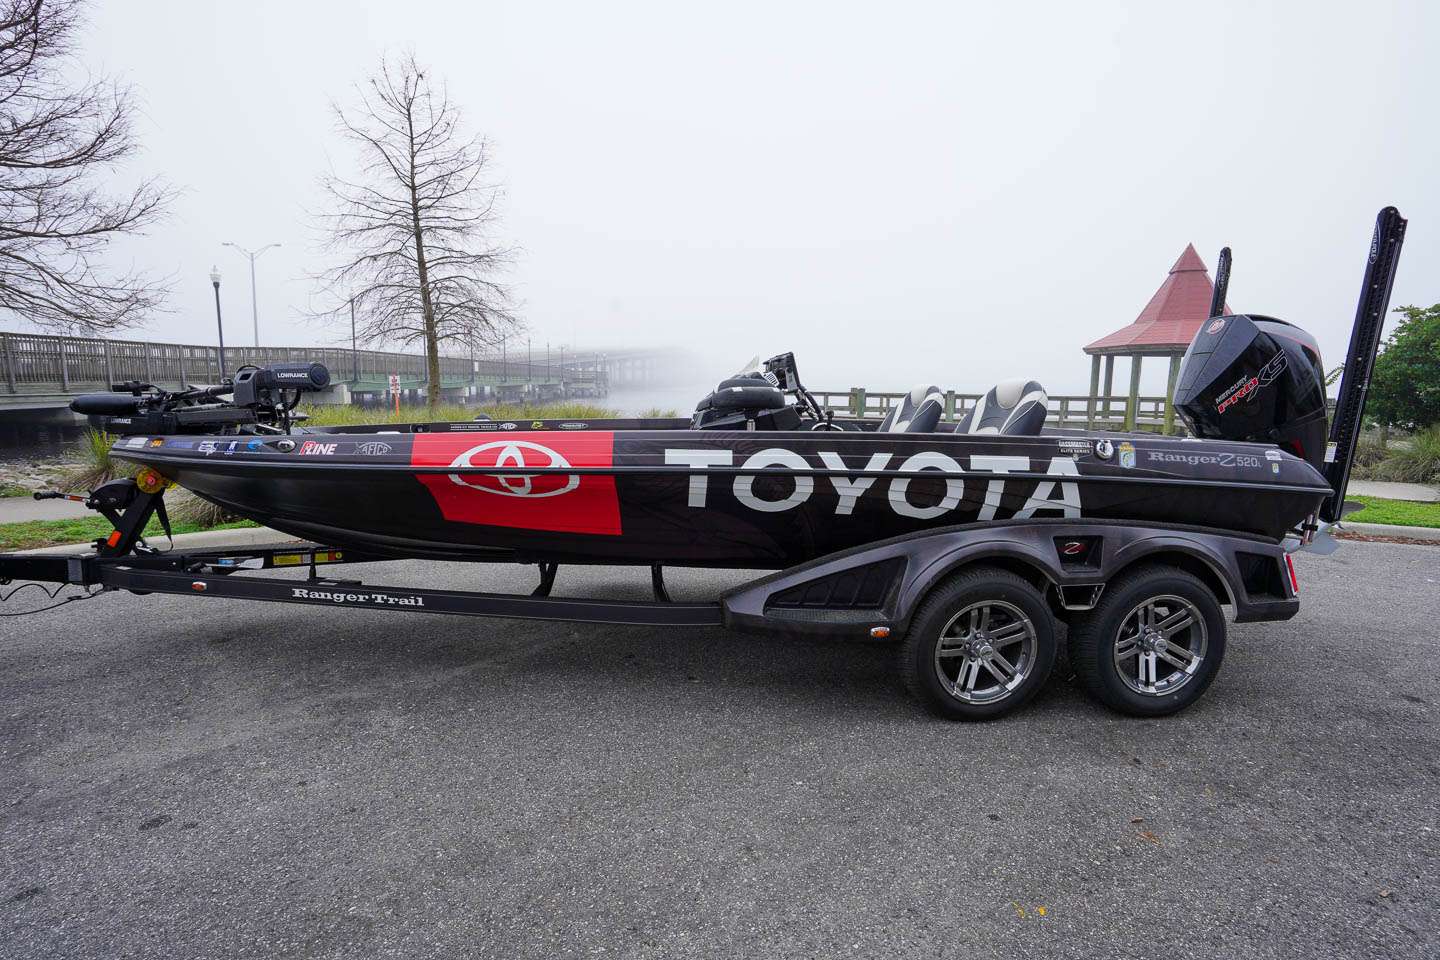 The anglers of the 2021 Elite Series showed off their new wraps for the season today at the 2021 AFTCO Bassmaster Elite at St. Johns River.
<br><br>
Let's kick it off with Matt Arey!